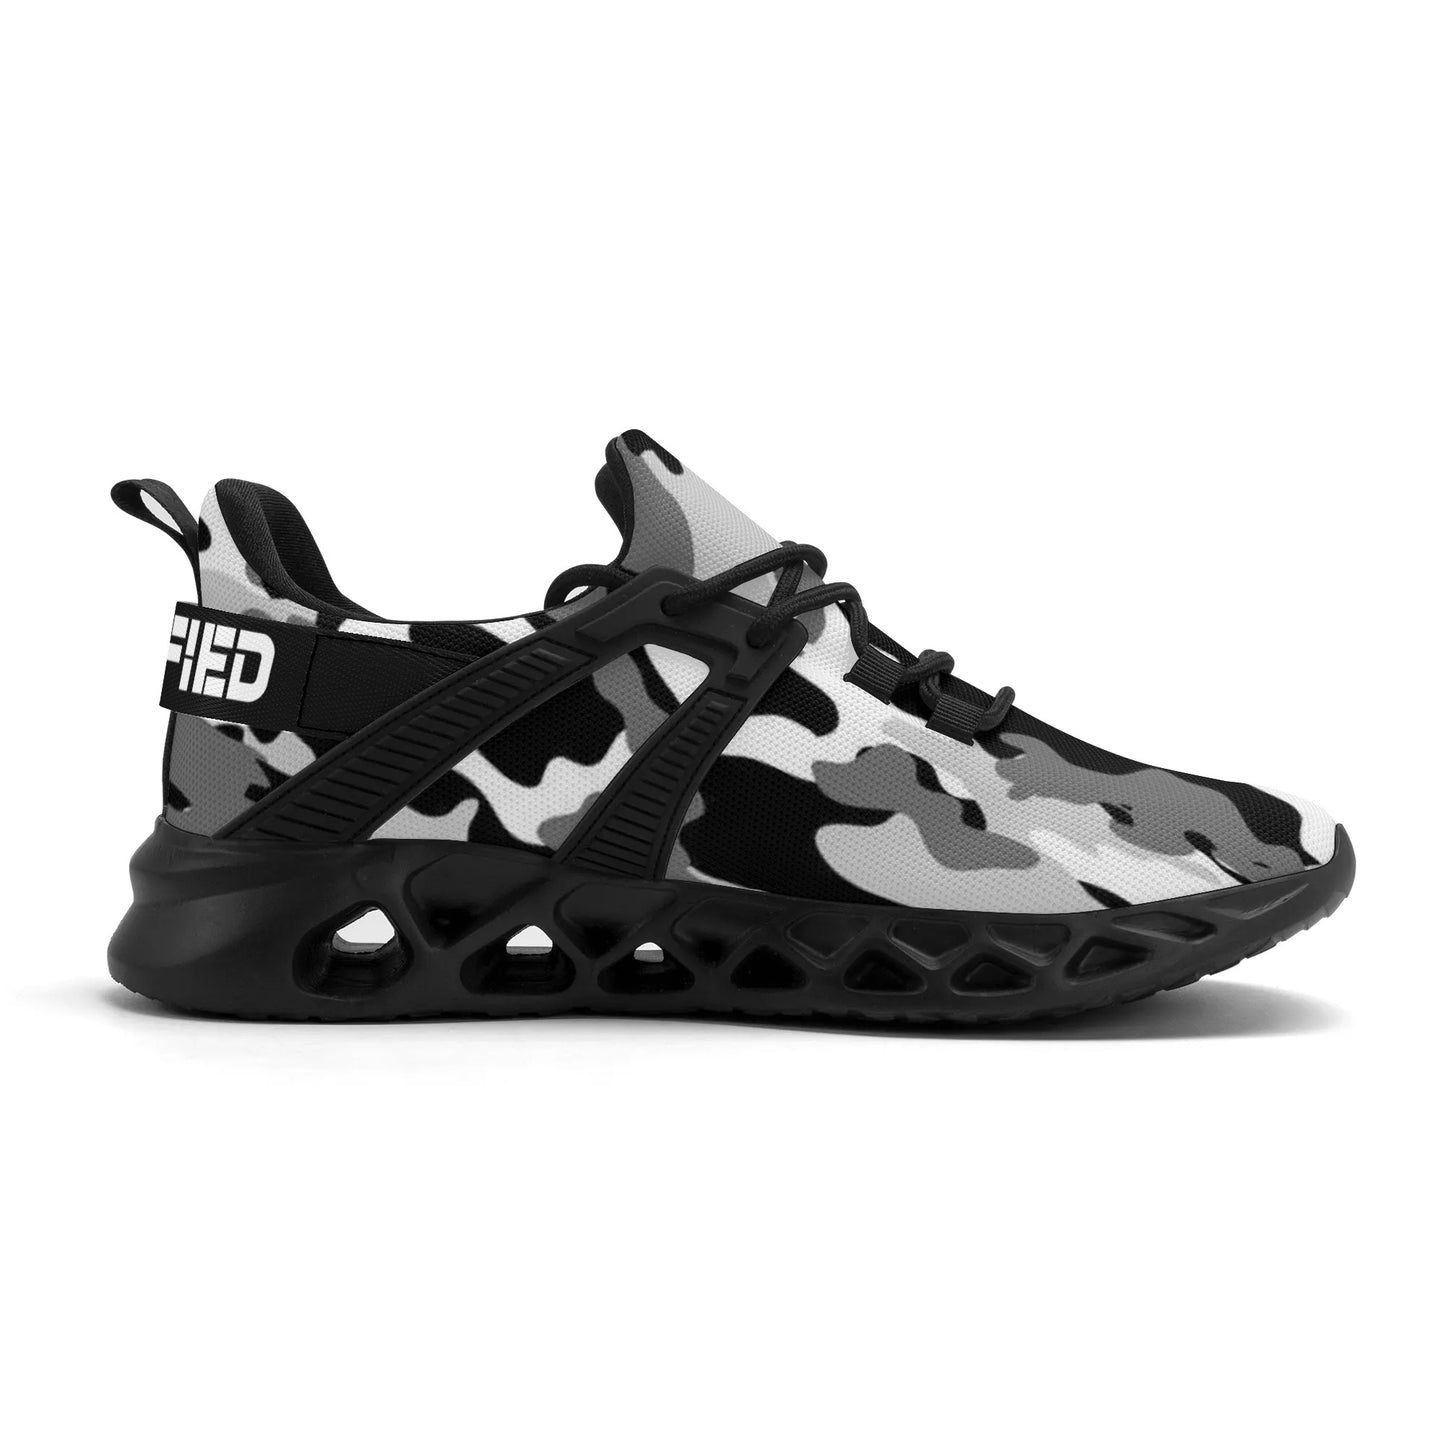 Mens Yeshua DOPiFiED MD Elastic Sport Sneakers